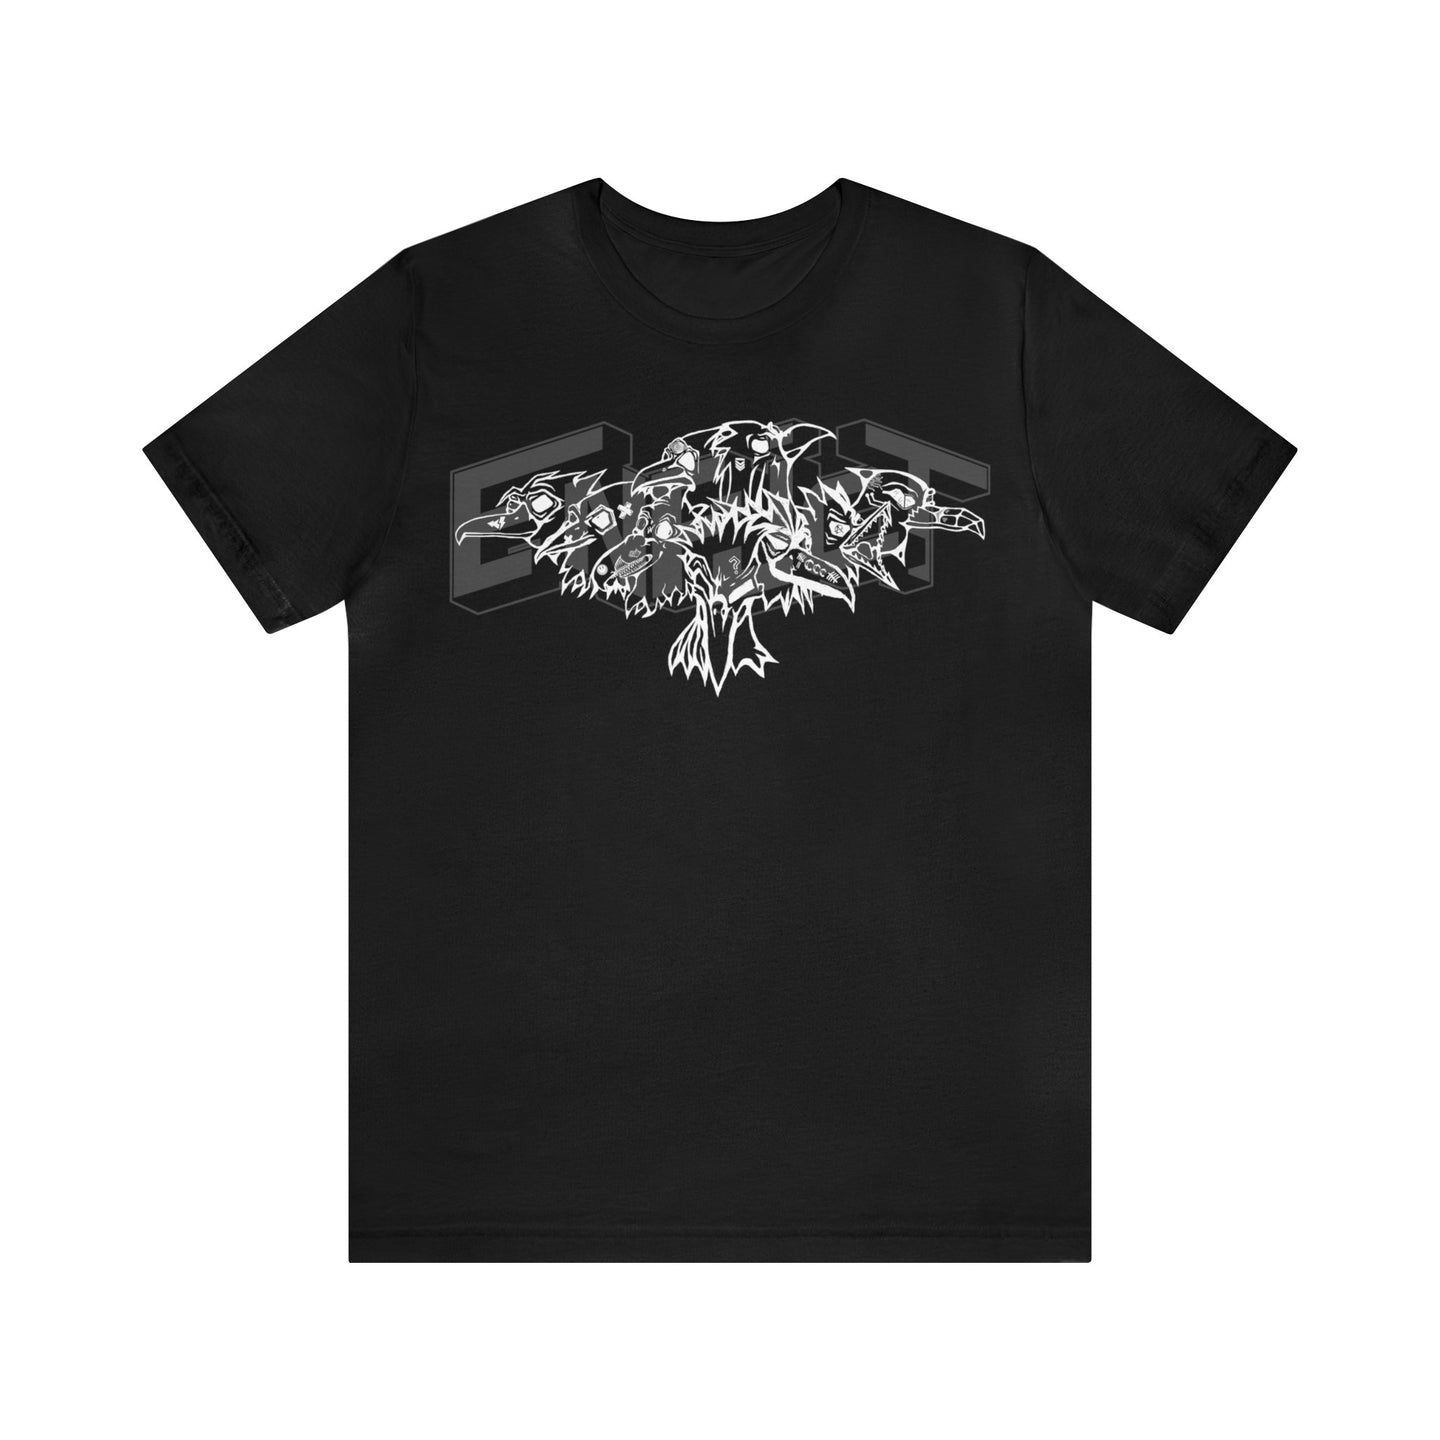 ENFLICT Tee - Corvus Extremus - Combined Logo Front and Back